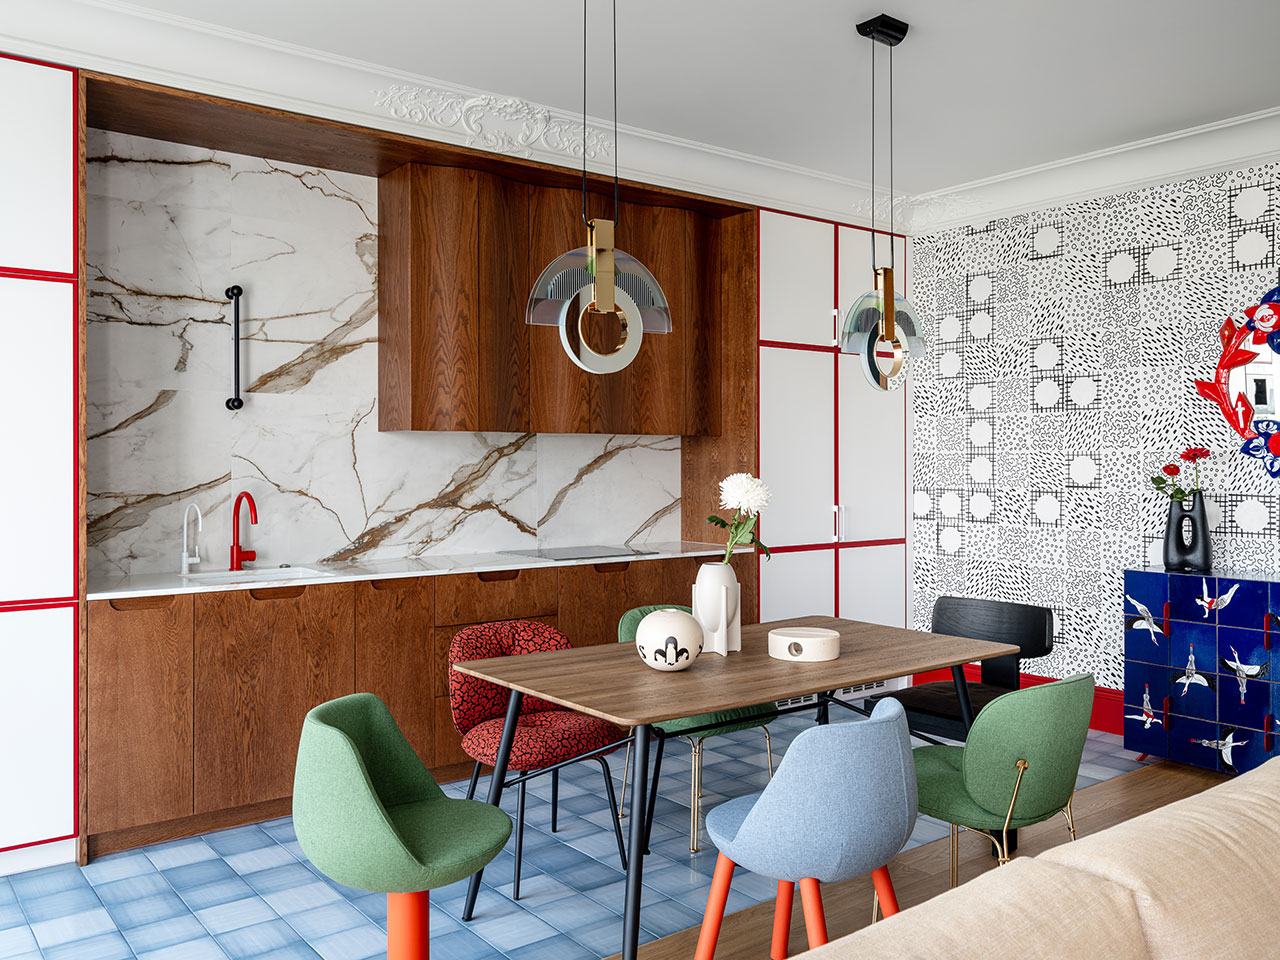 Whimsical Wonderland: A Quirky Modern Apartment Full of Color + Pattern